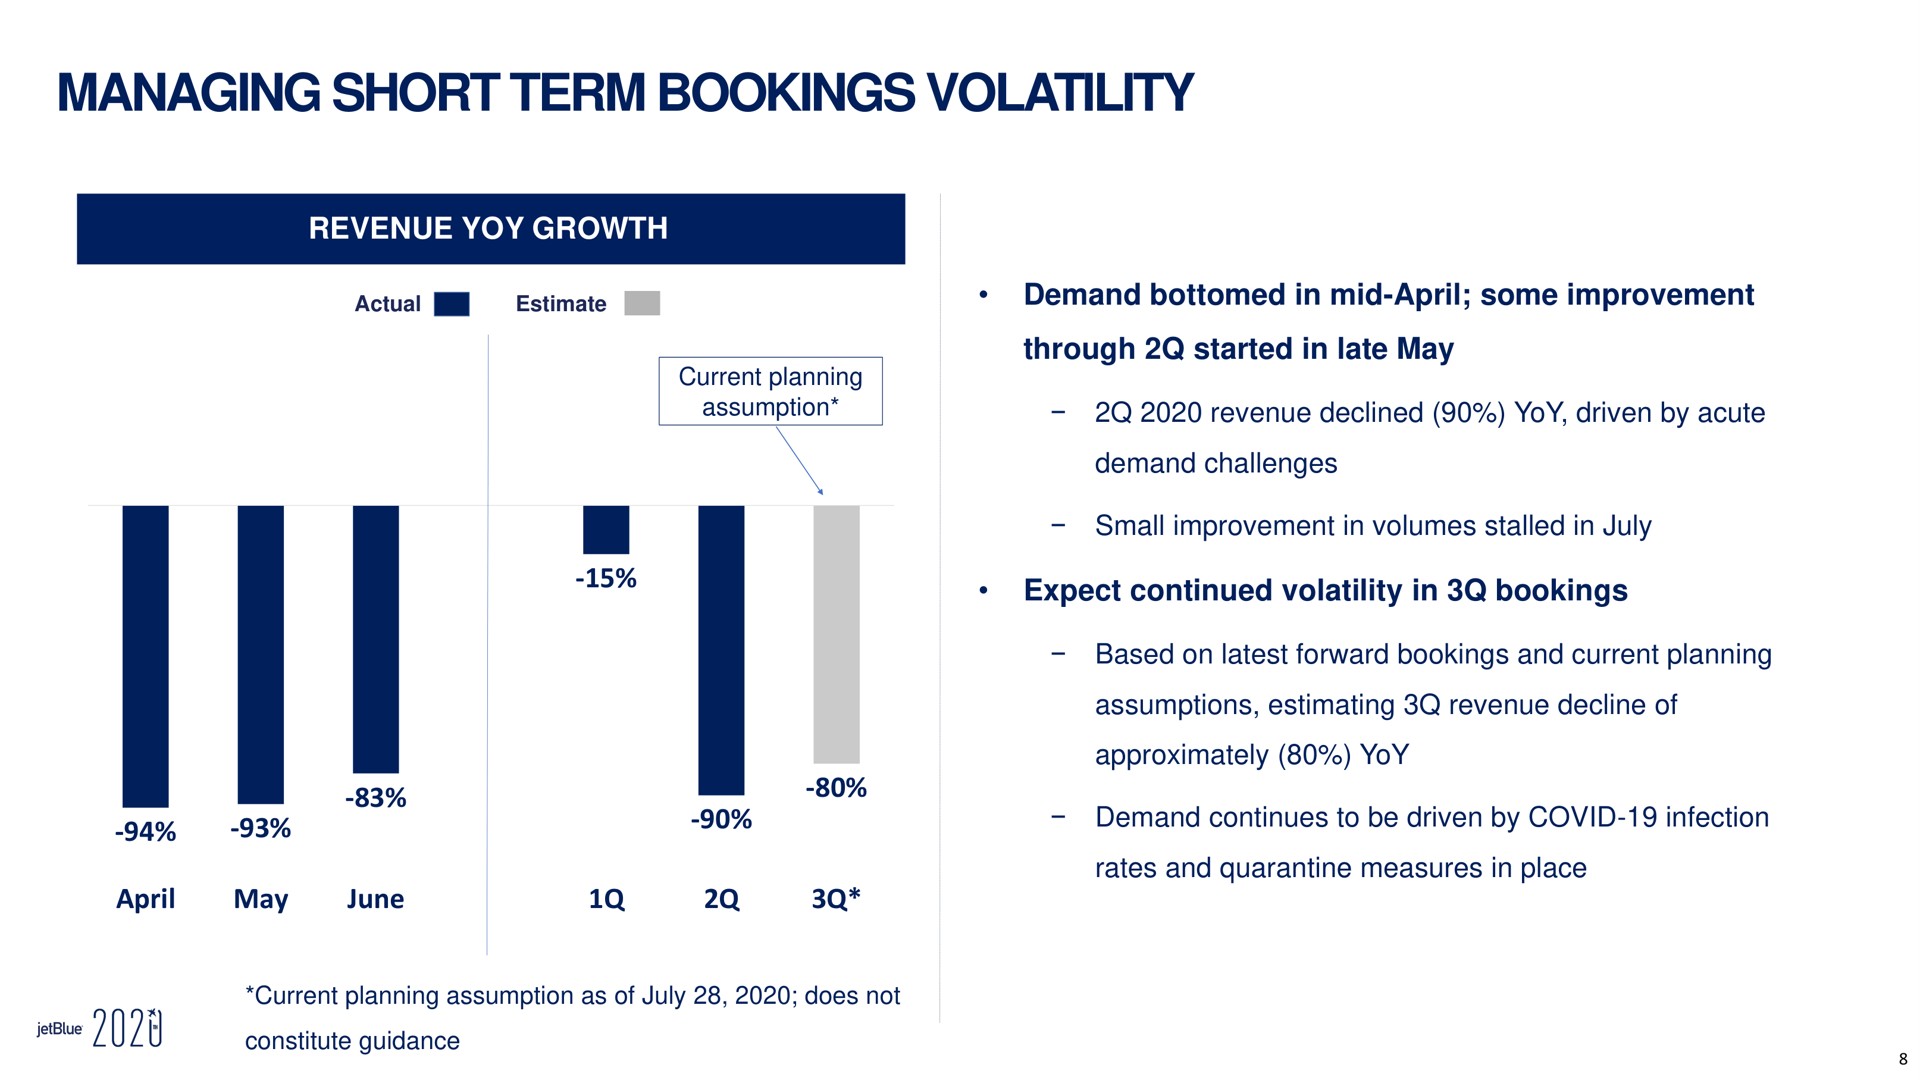 managing short term bookings volatility revenue yoy growth demand bottomed in mid some improvement through started in late may expect continued volatility in bookings may june actual estimate declined driven by acute i constitute guidance continues to be driven by covid infection | jetBlue